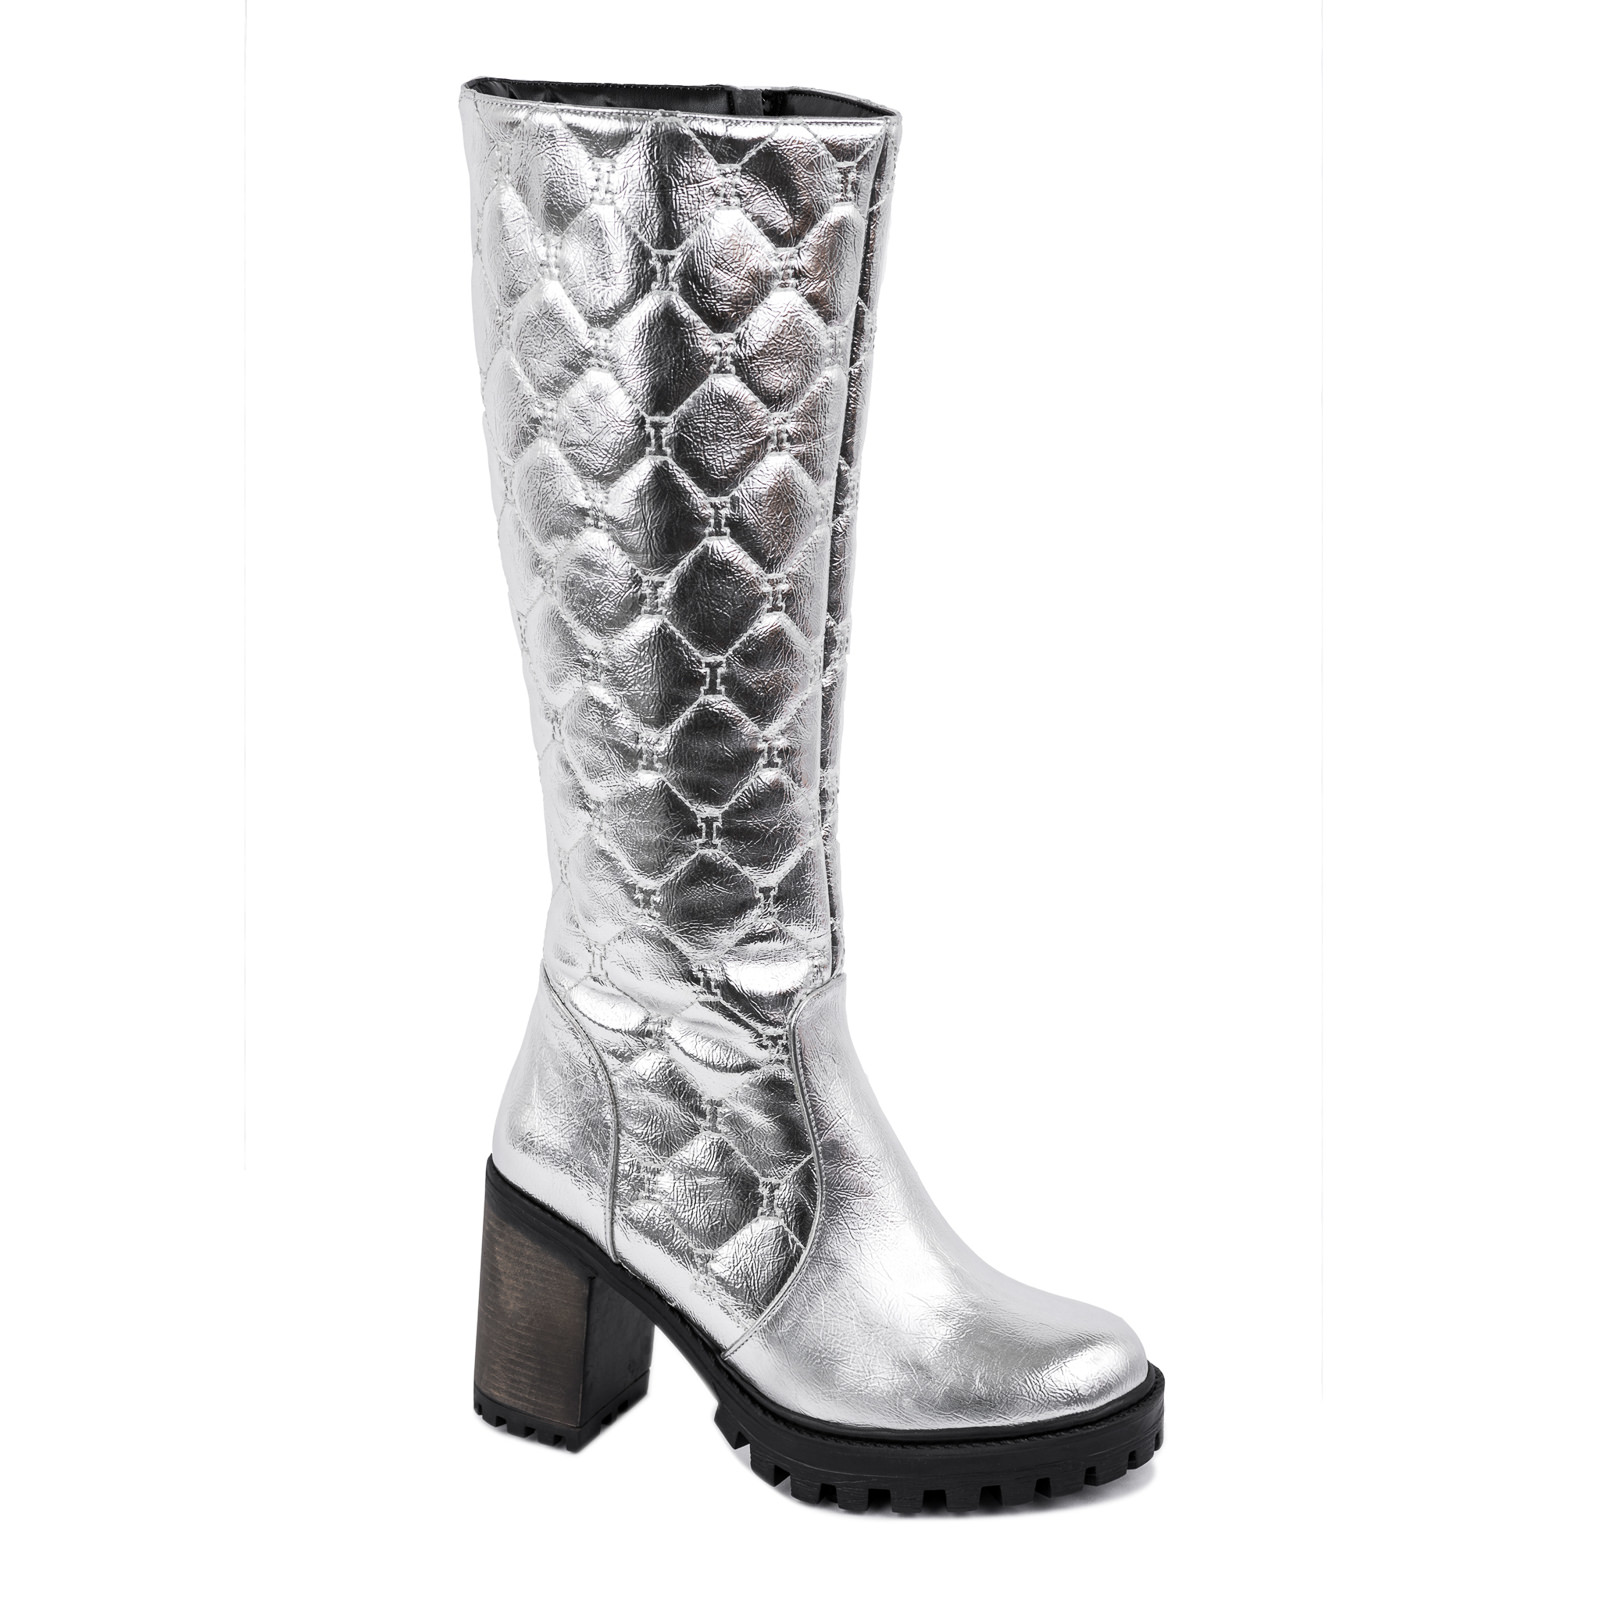 SAW HIGH BOOTS WITH BLOCK HEEL - SILVER